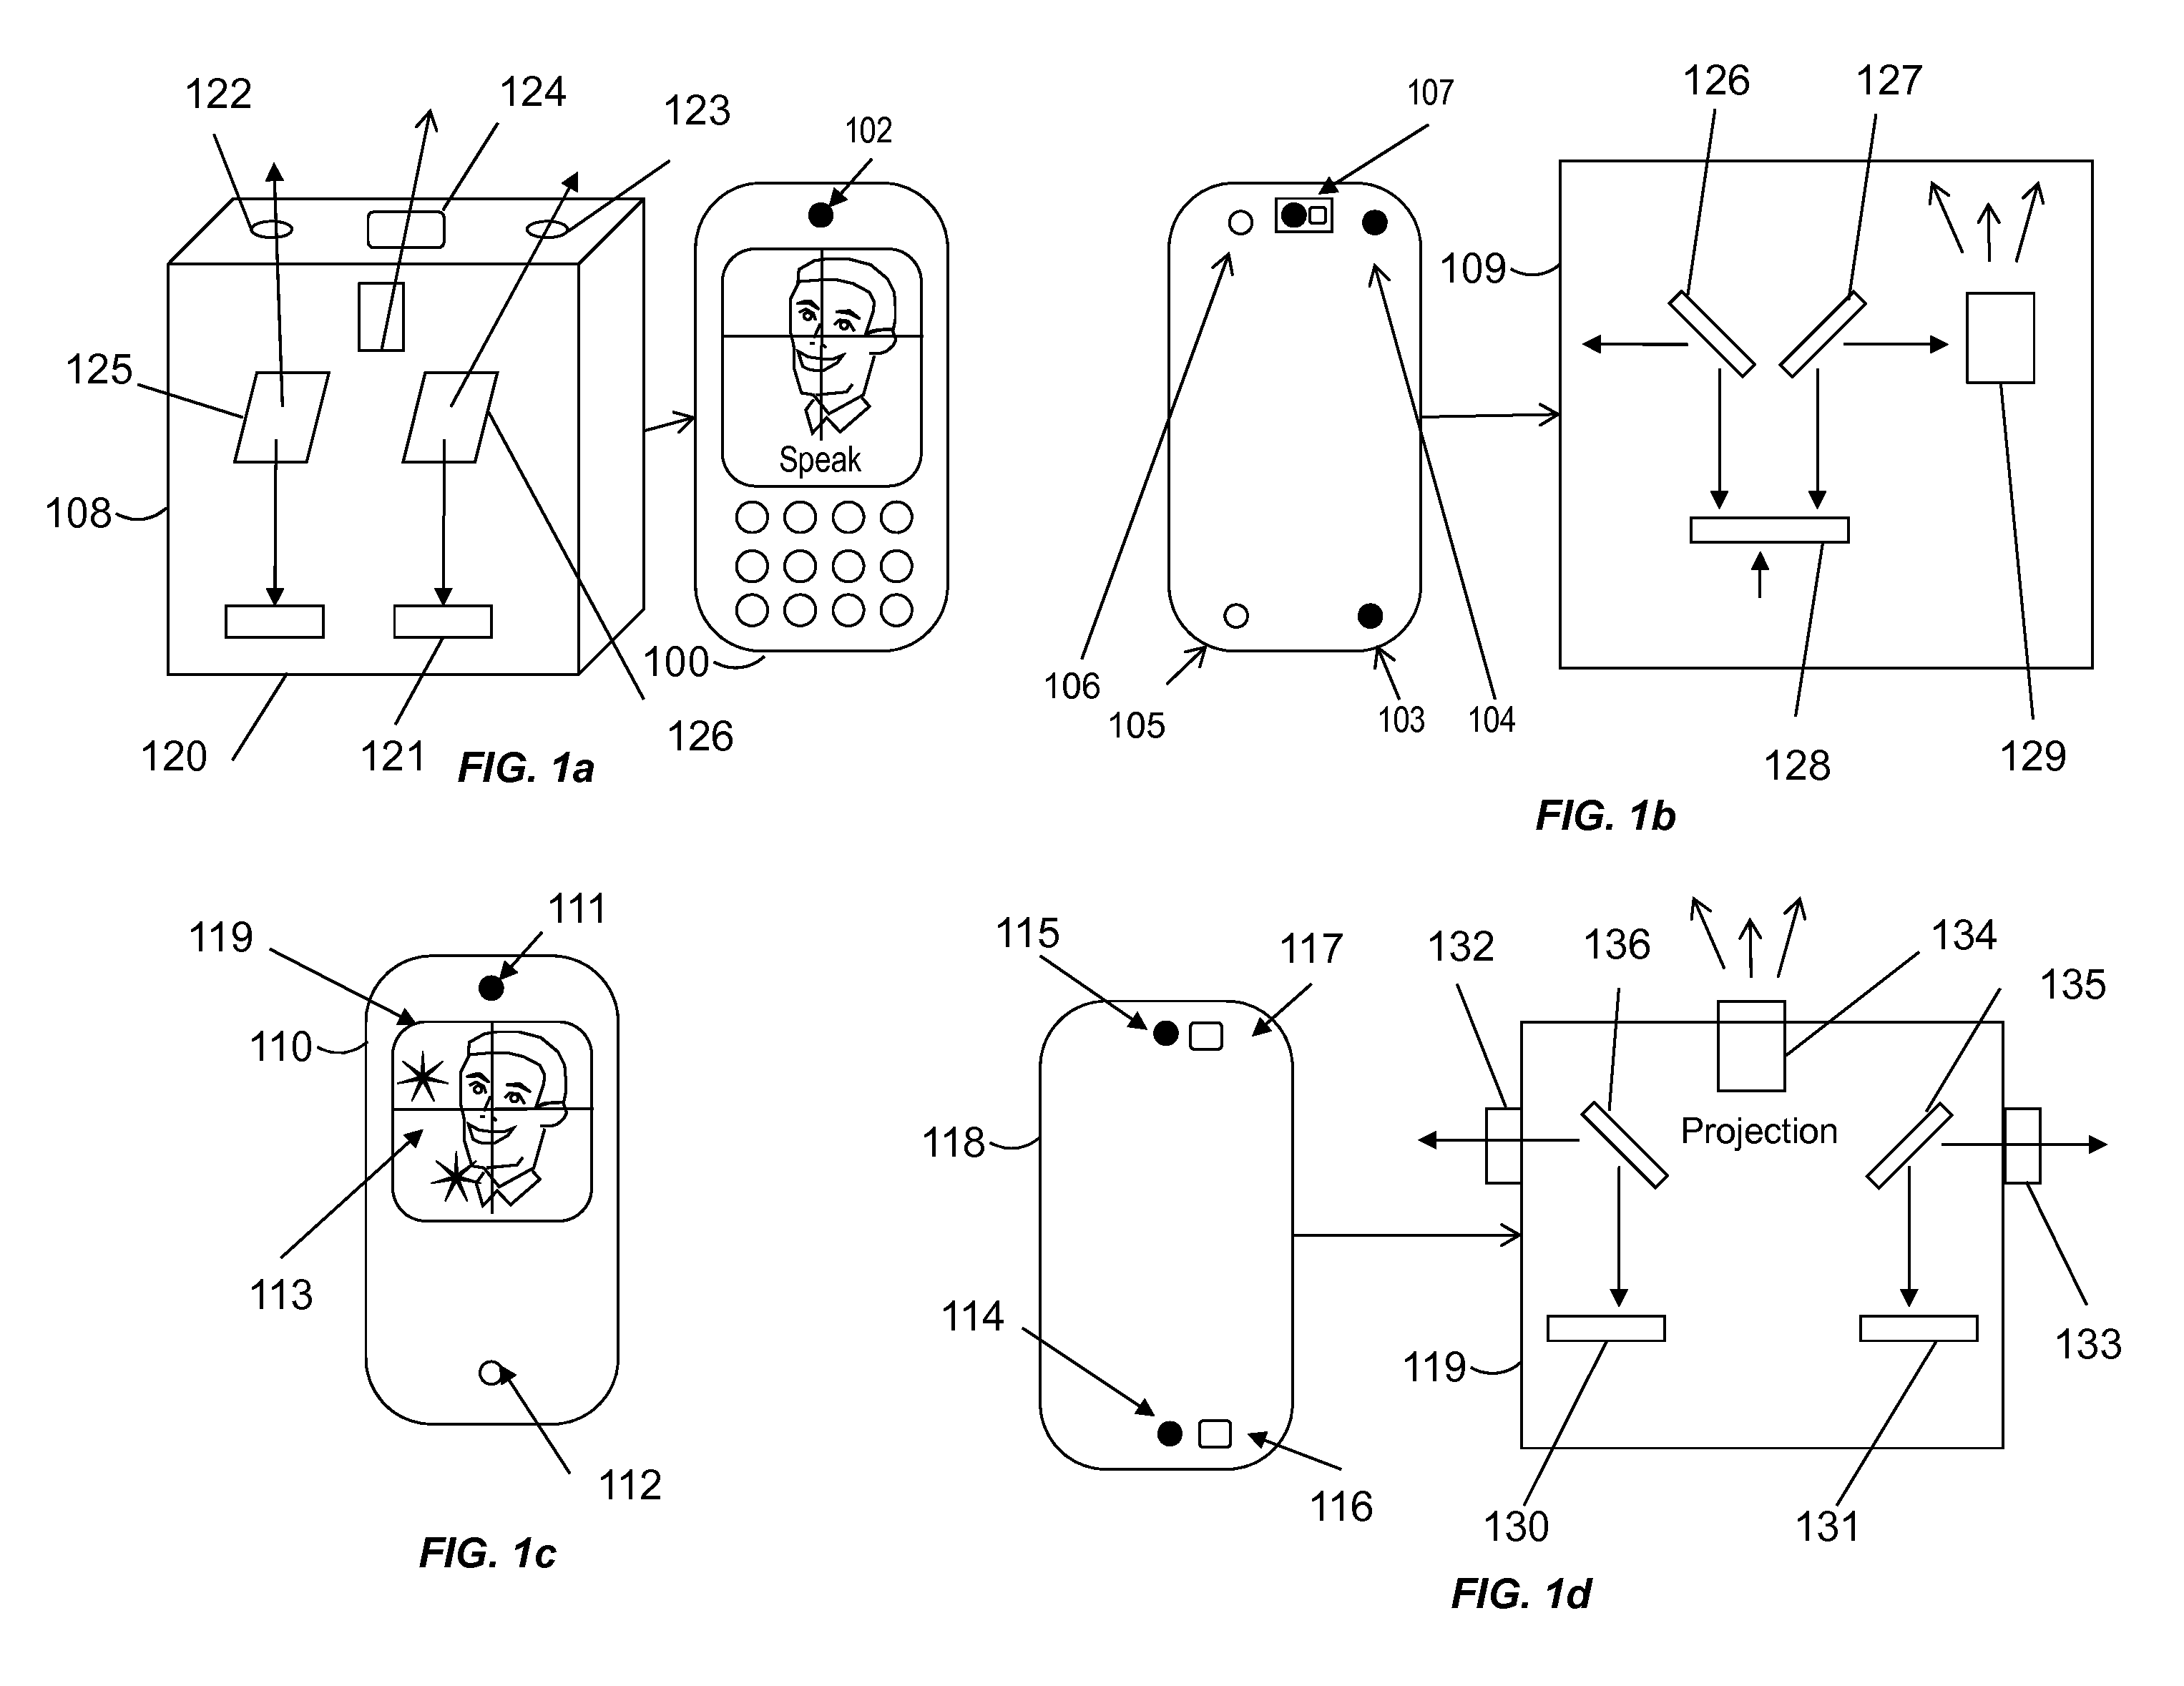 Apparatus for identifying protecting, requesting, assisting and managing information